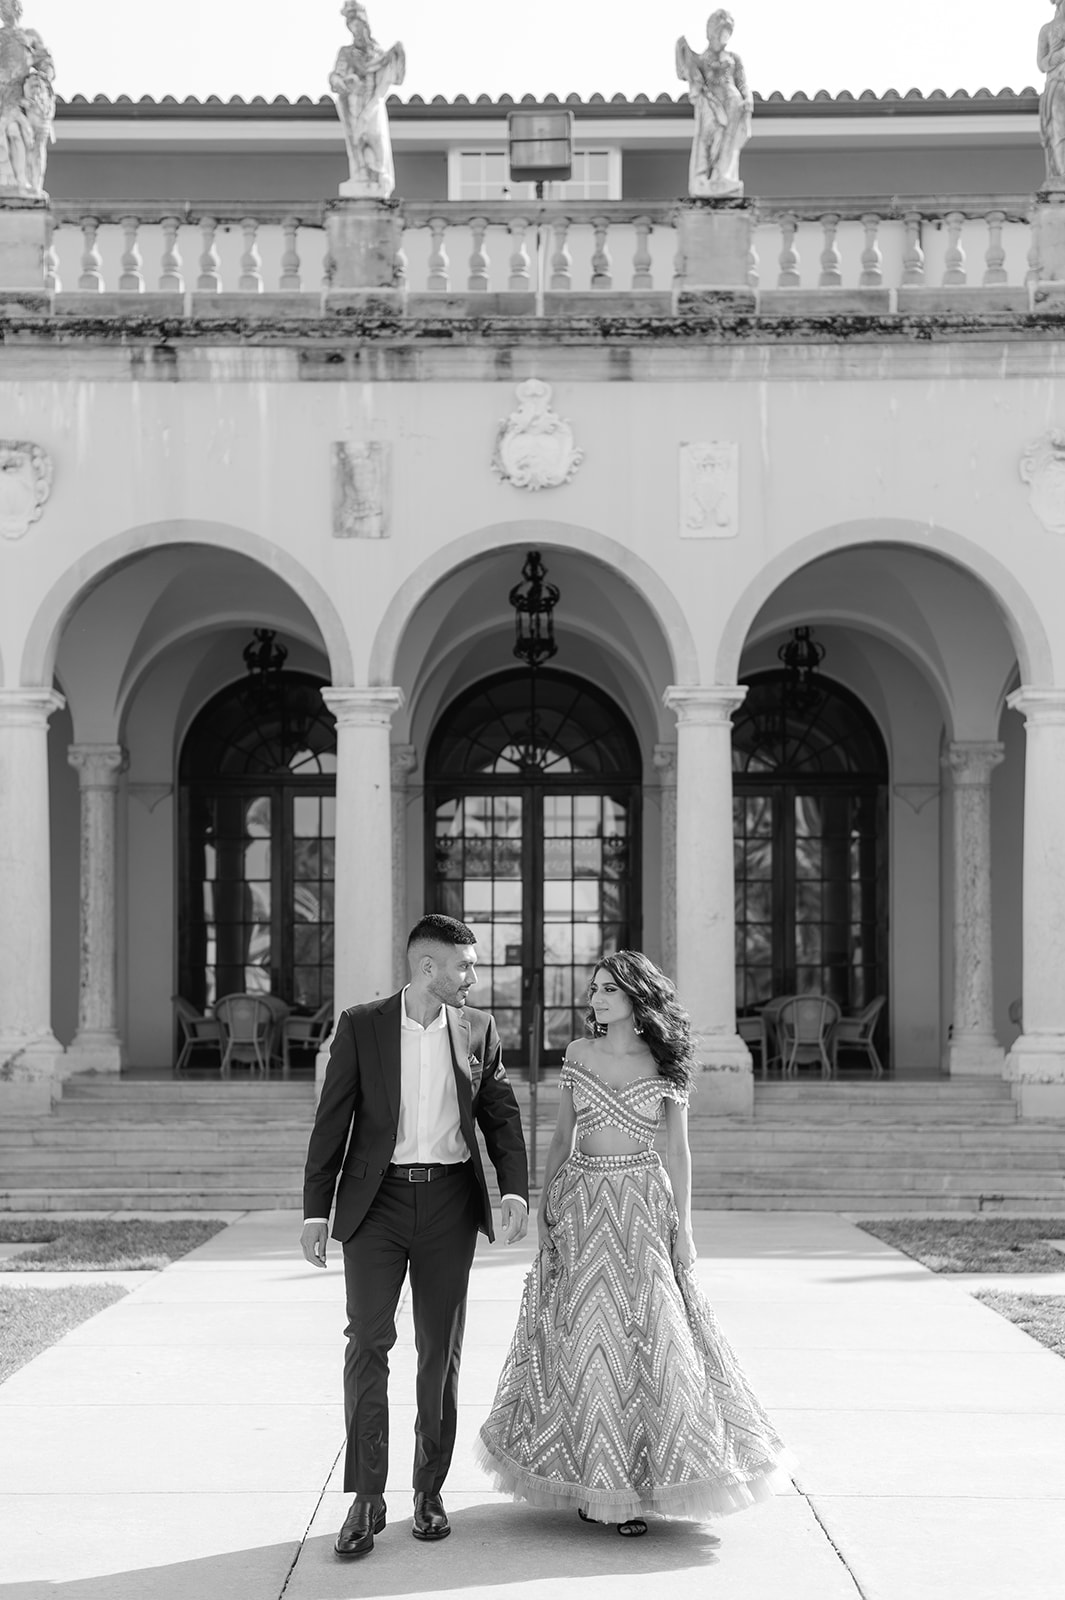 "Indian bride and groom looking stunning in front of Ca' d'Zan at the Ringling Museum"
